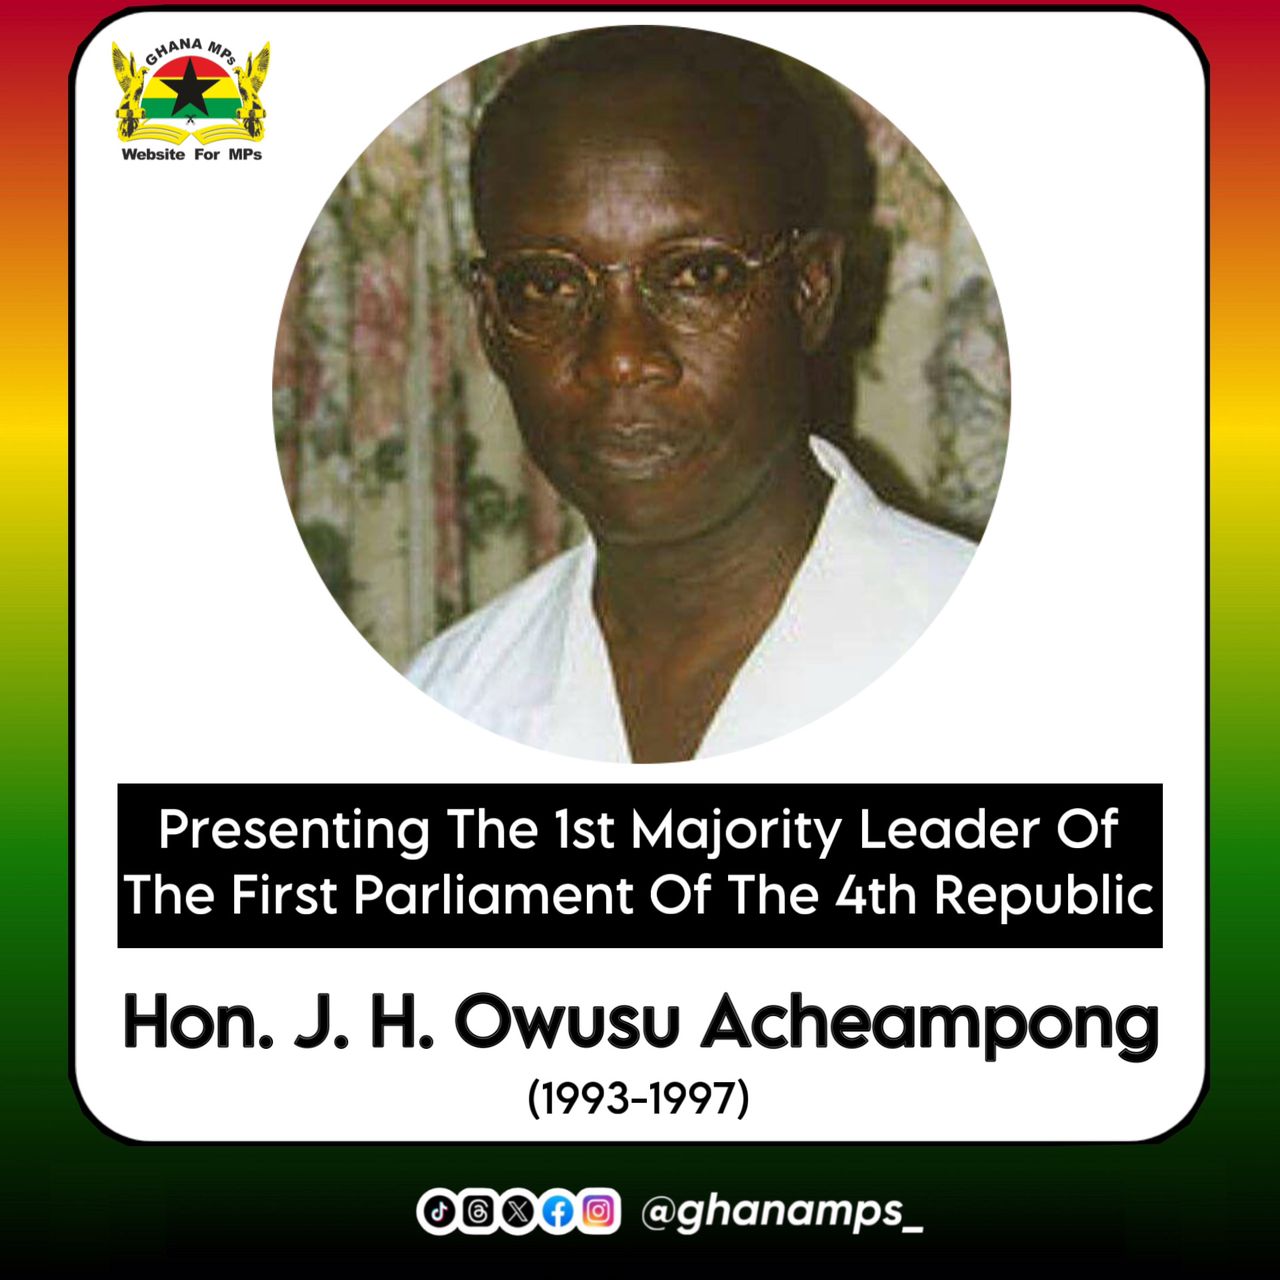 Hon. Joseph Henry Owusu-Acheampong: 1st Majority Leader of the 1st Parliament of the 4th Republic of Ghana